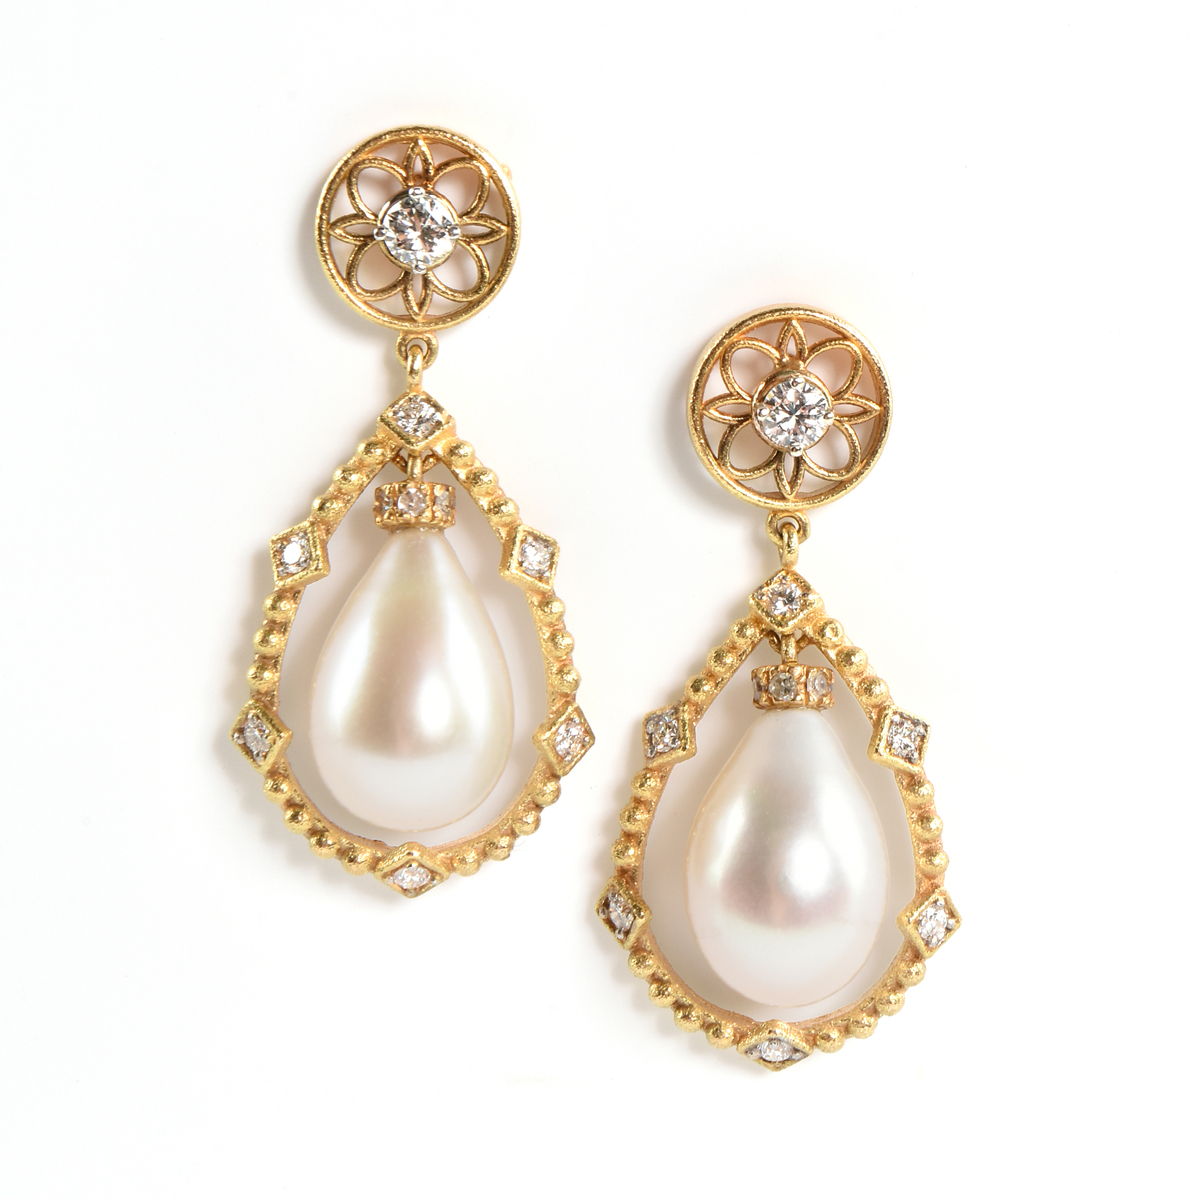 A PAIR OF 18K YELLOW GOLD, PEARL, AND DIAMOND LADY'S EARRINGS, suspending two cultured white tear